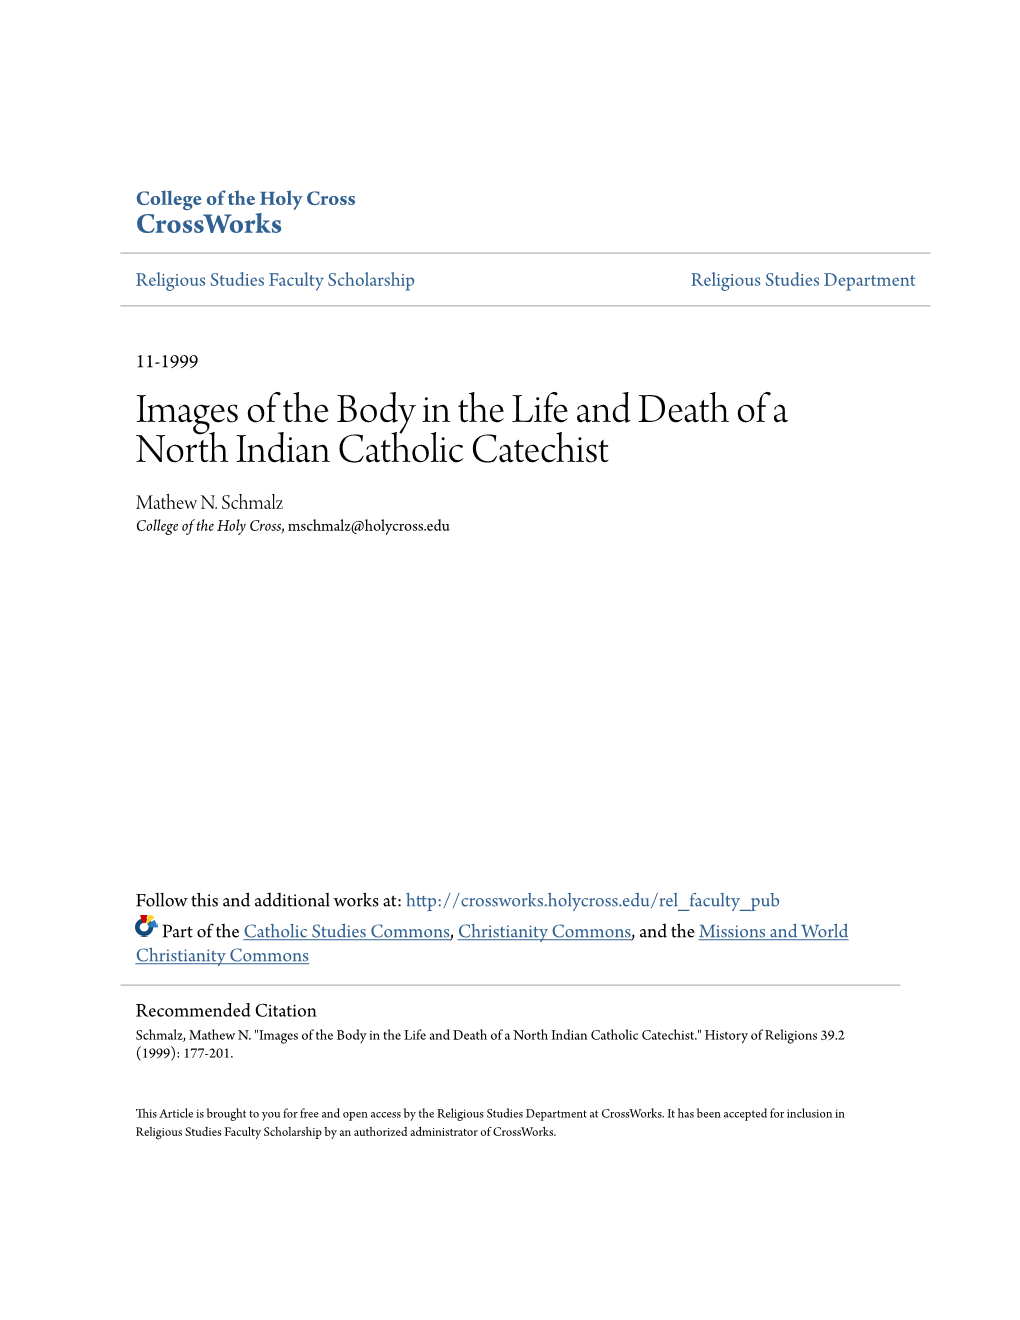 Images of the Body in the Life and Death of a North Indian Catholic Catechist Mathew N